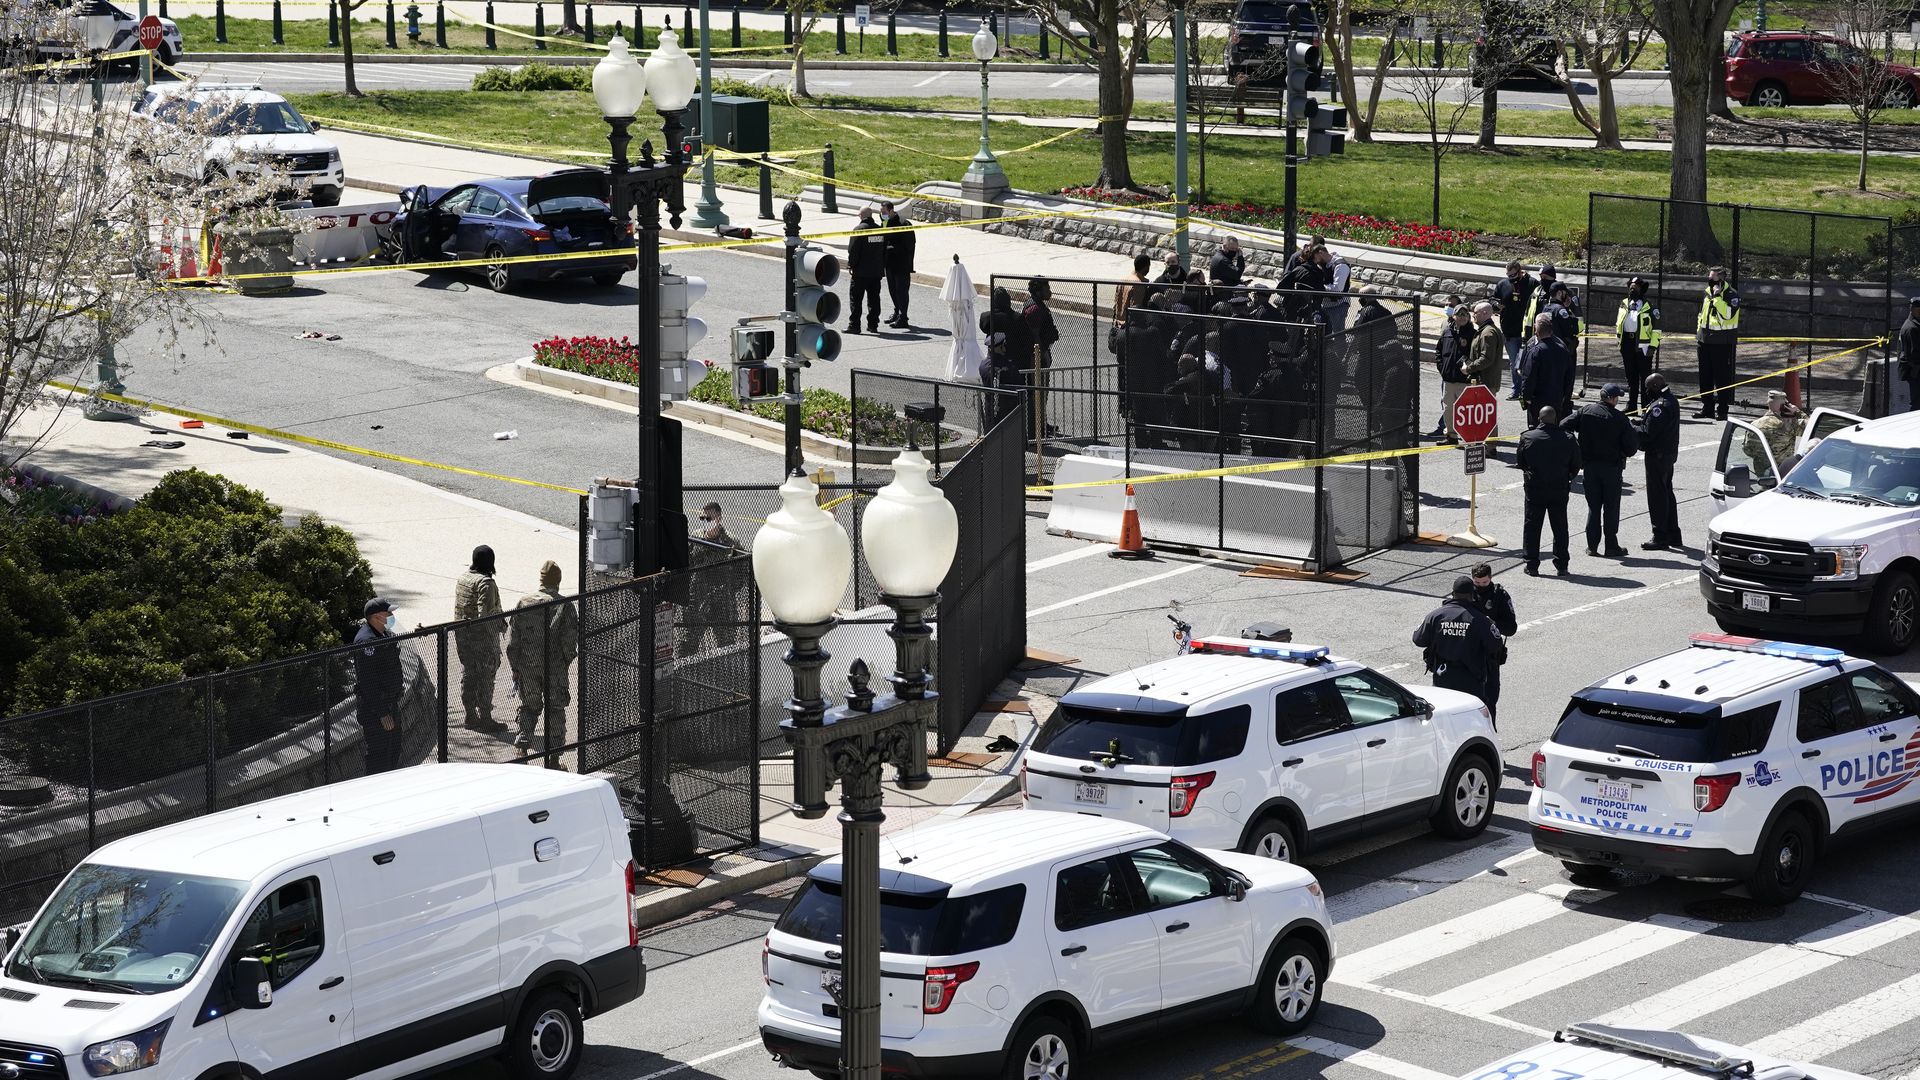 Police officers gather near a car that crashed into a barrier on Capitol Hill in Washington, Friday, April 2, 2021. (AP Photo/J. Scott Applewhite